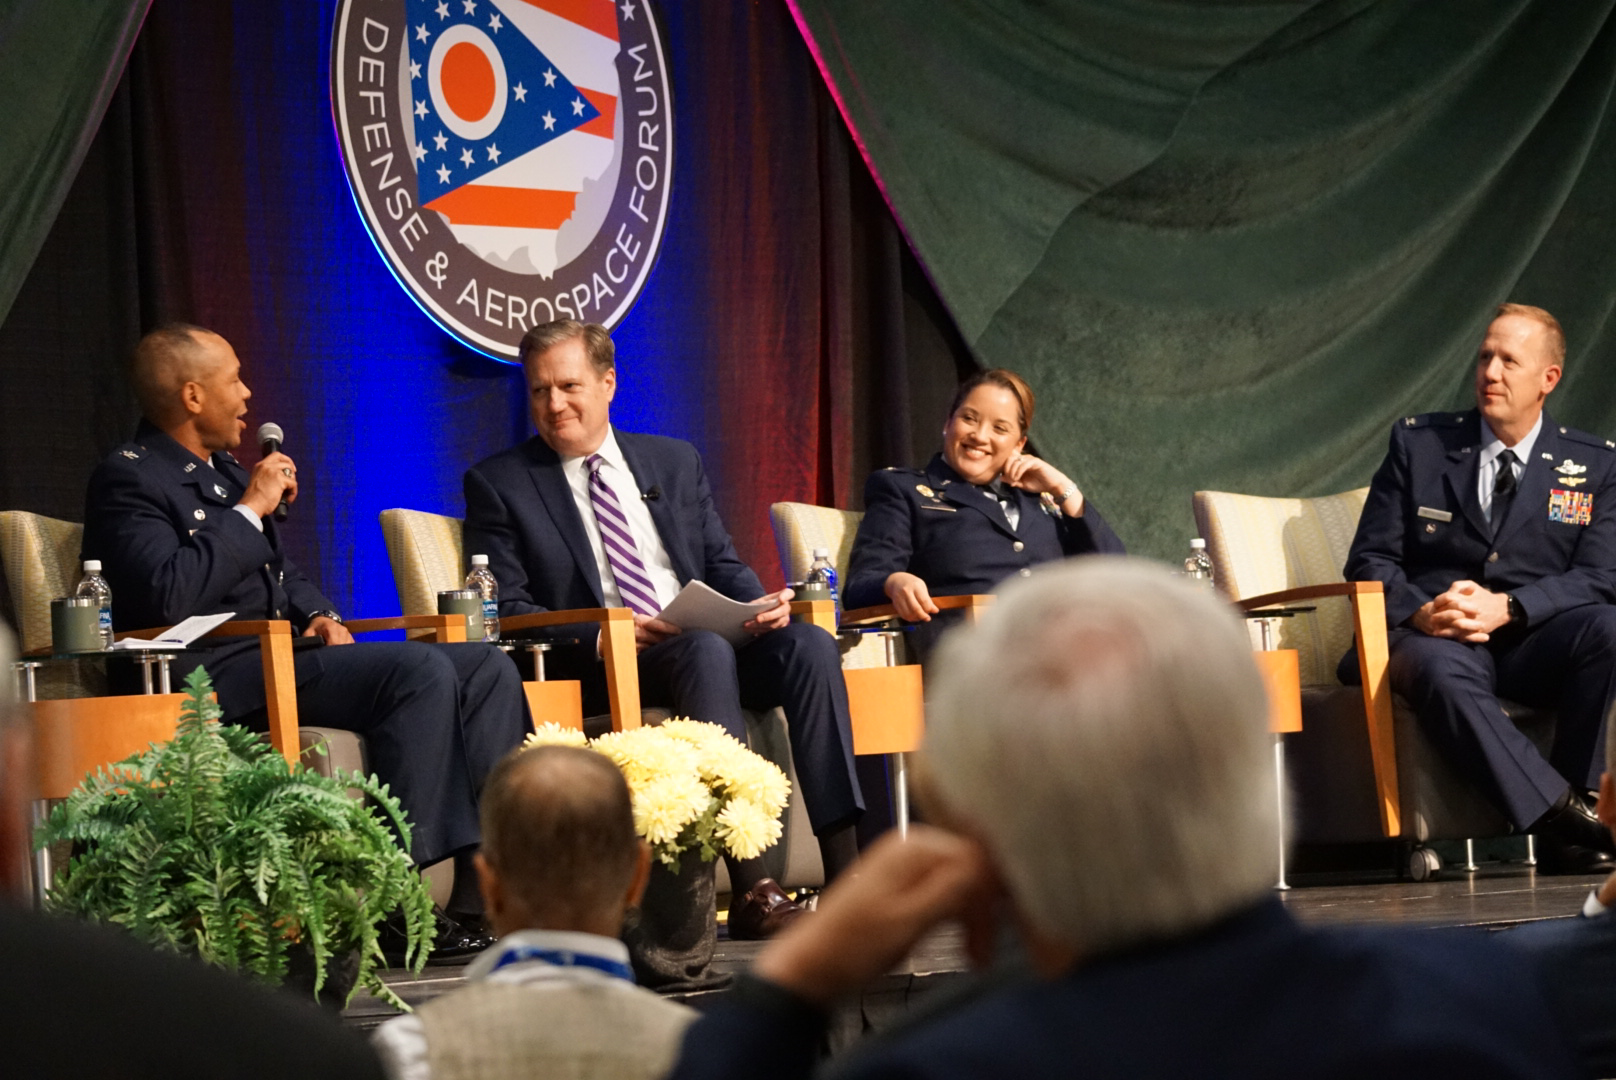 The ‘Ohio’s Role in National Security Intelligence’ panel